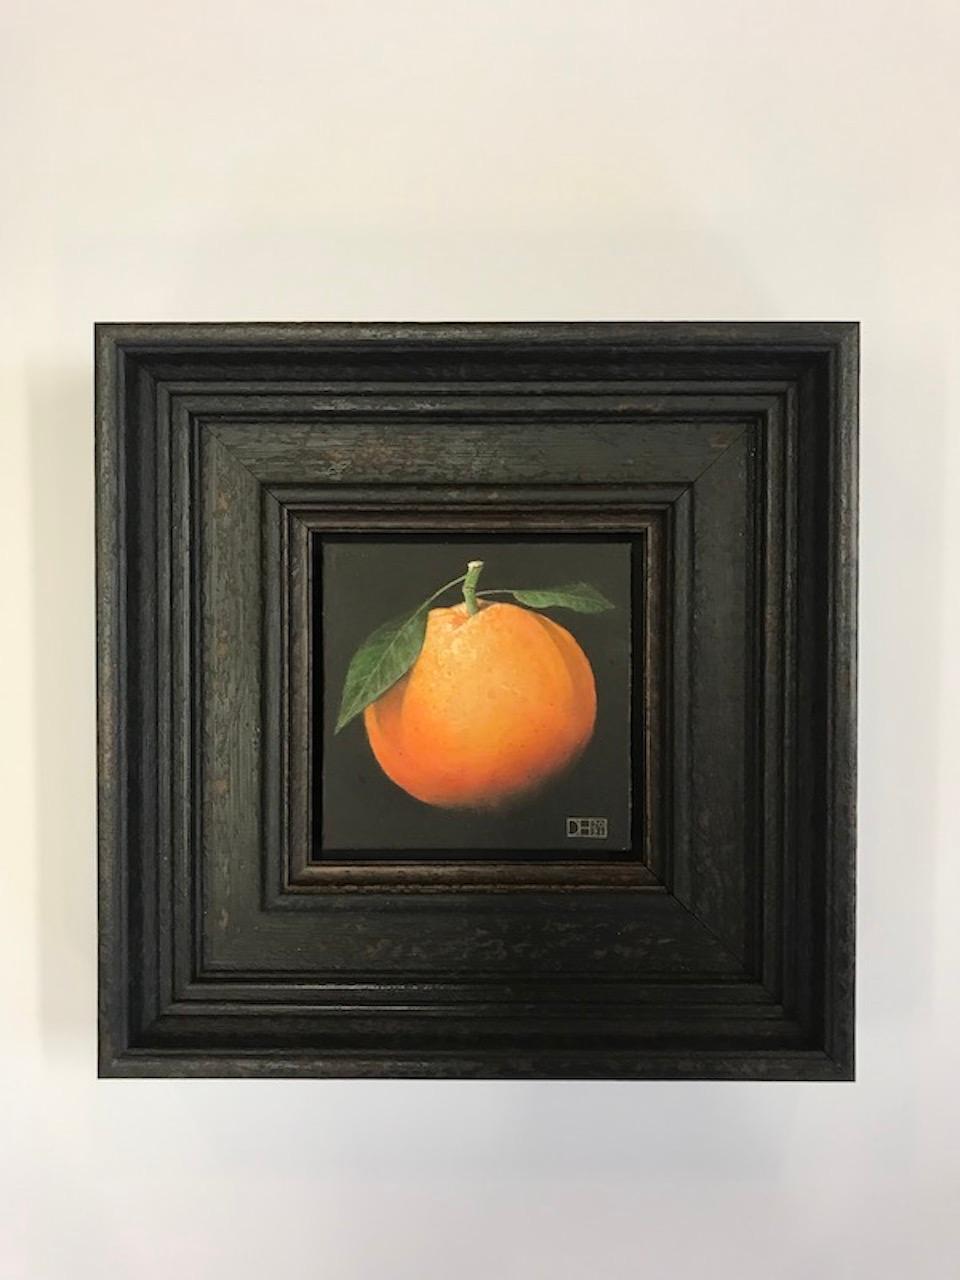 Clementine - Painting by Dani Humberstone